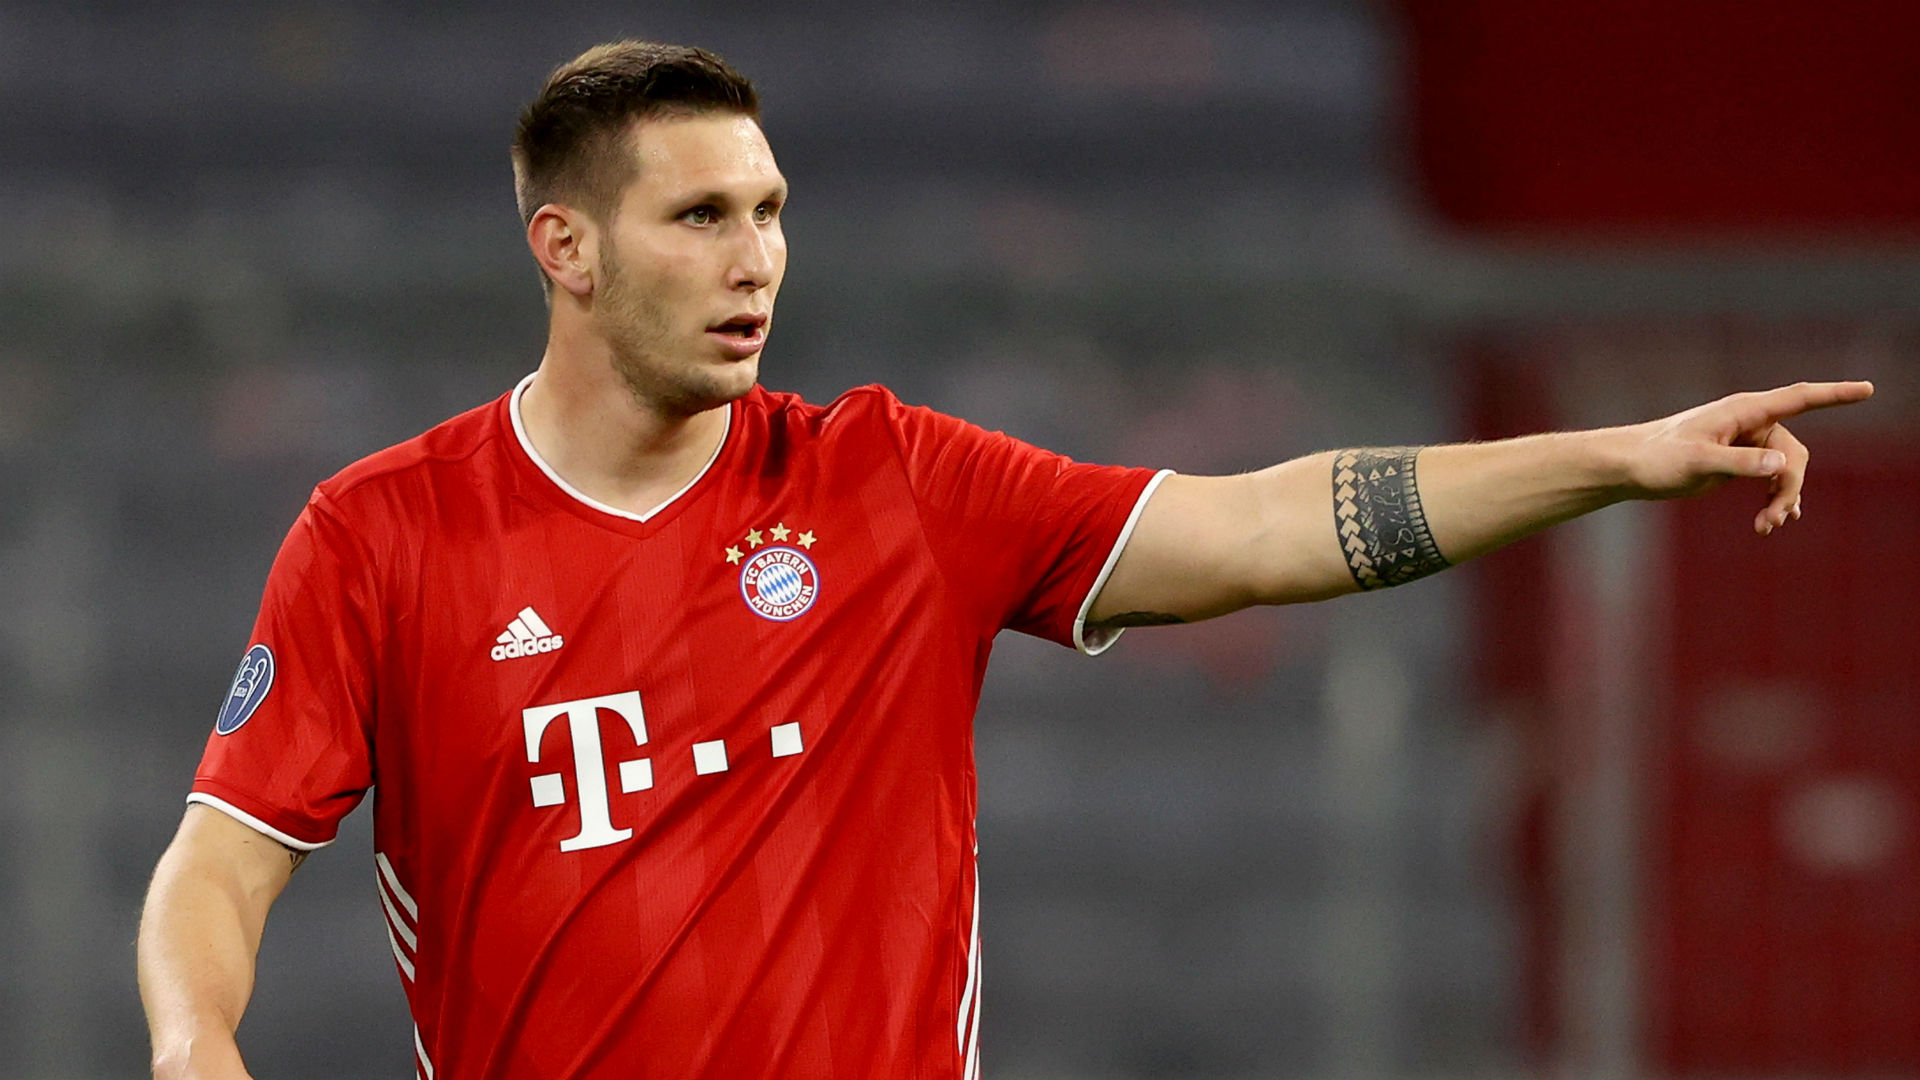 We are happy to extend Niklas Sule’s contract but only under right conditions, reveals Karl-Heinz Rummenigge